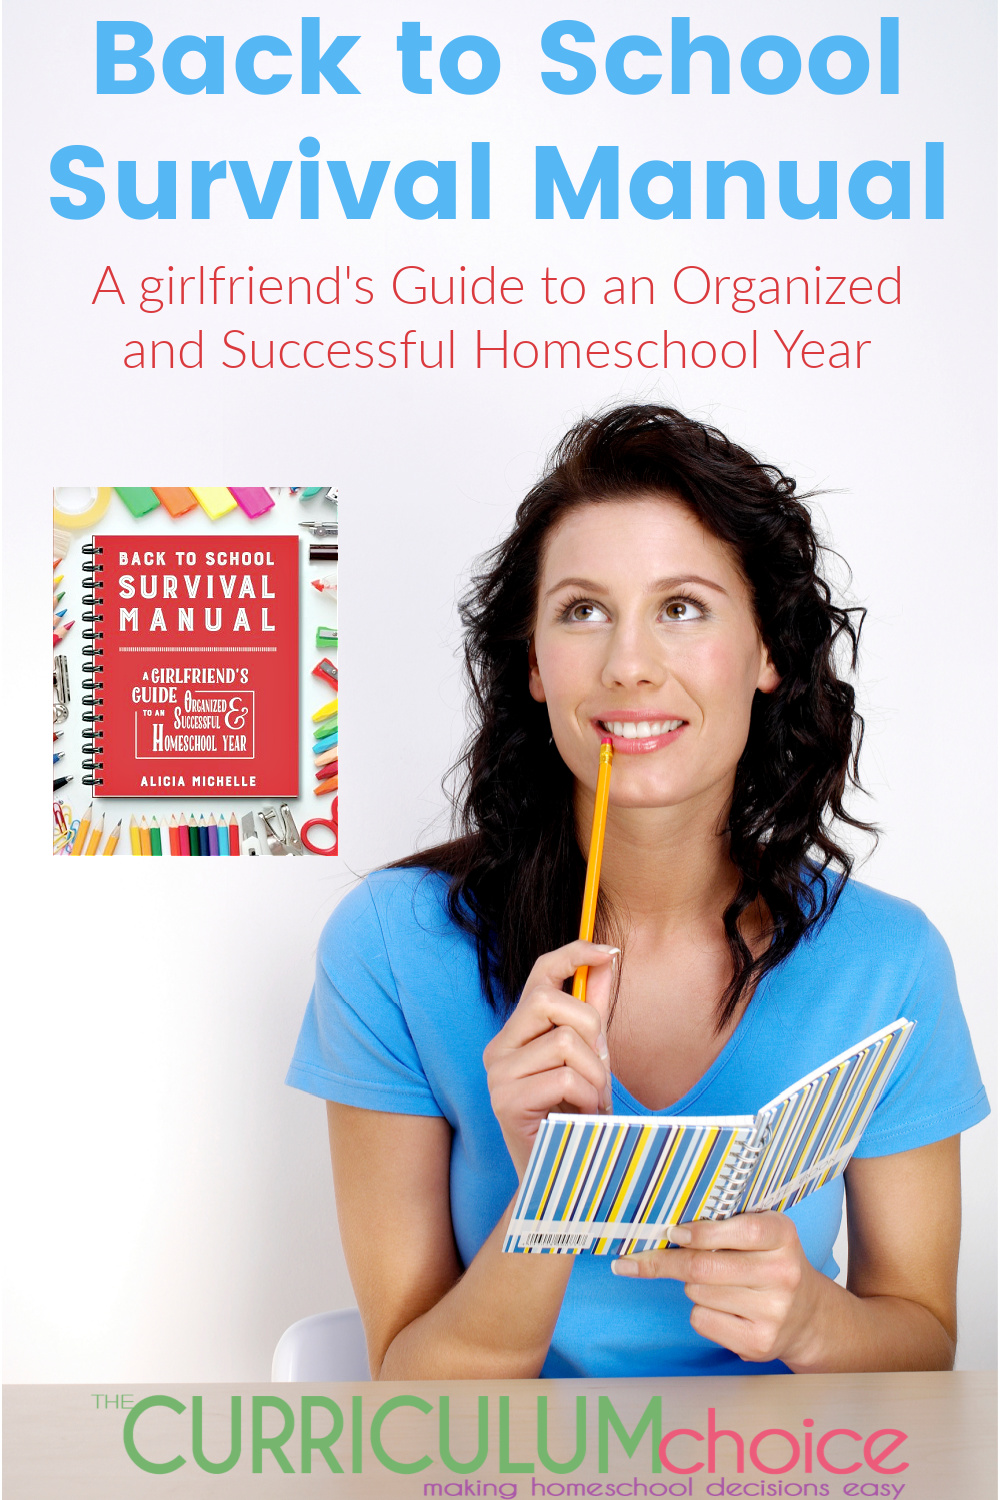 This is a review of the Back To School Survival Manual - A Girlfriend's Guide to an Organized & Successful Homeschool Year. It's a resource for all homeschoolers both new and old! With tips, tricks, advice from a veteran homeschool mom and bonus printables including checklists, charts, and planning activities! A review from The Curriculum Choice